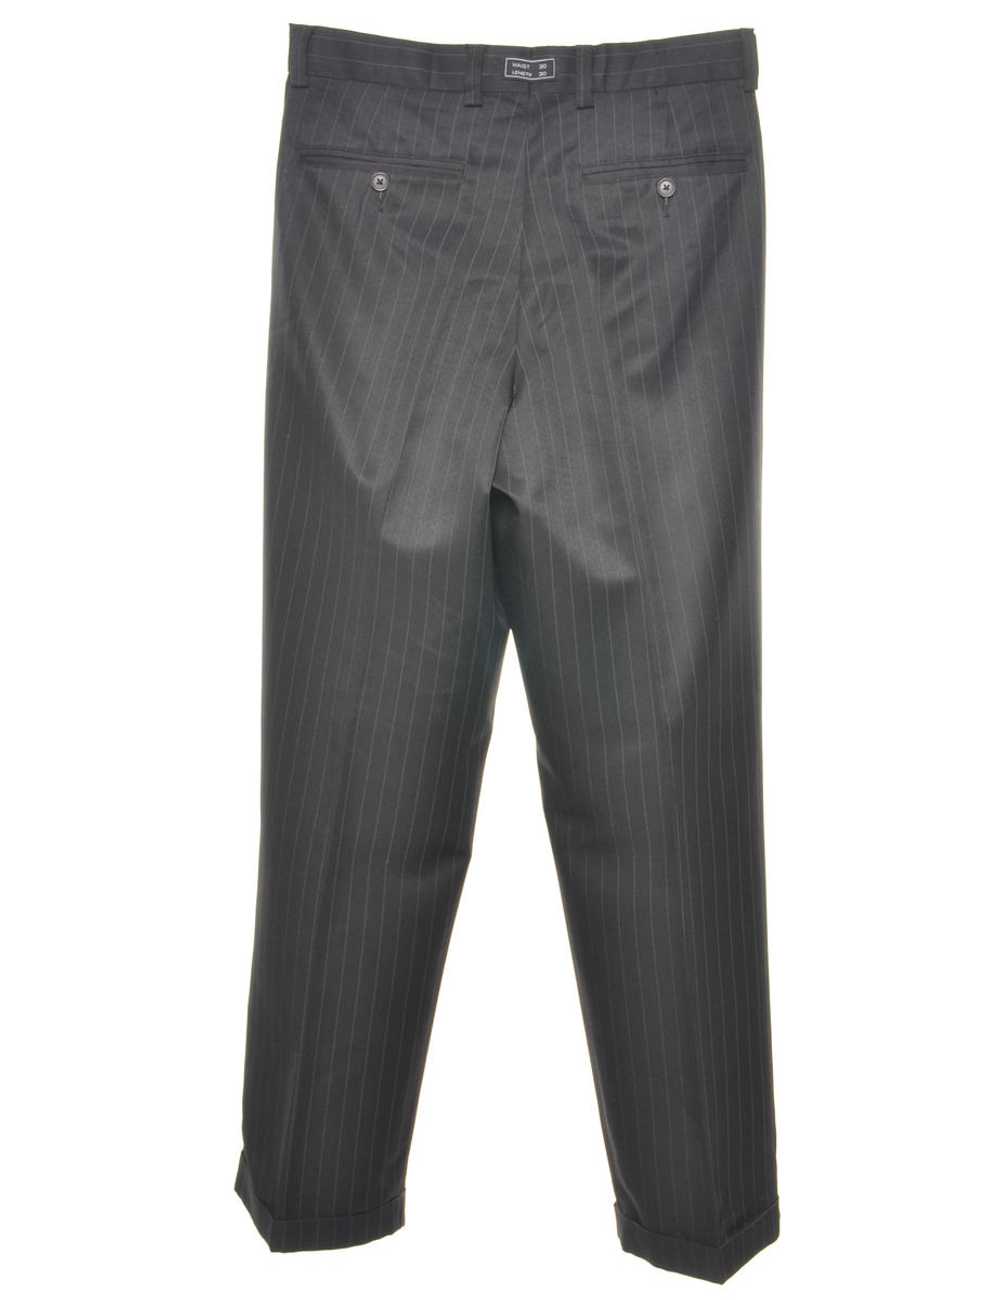 Pinstriped Black Classic Suit Trousers - W30 L30 - image 2